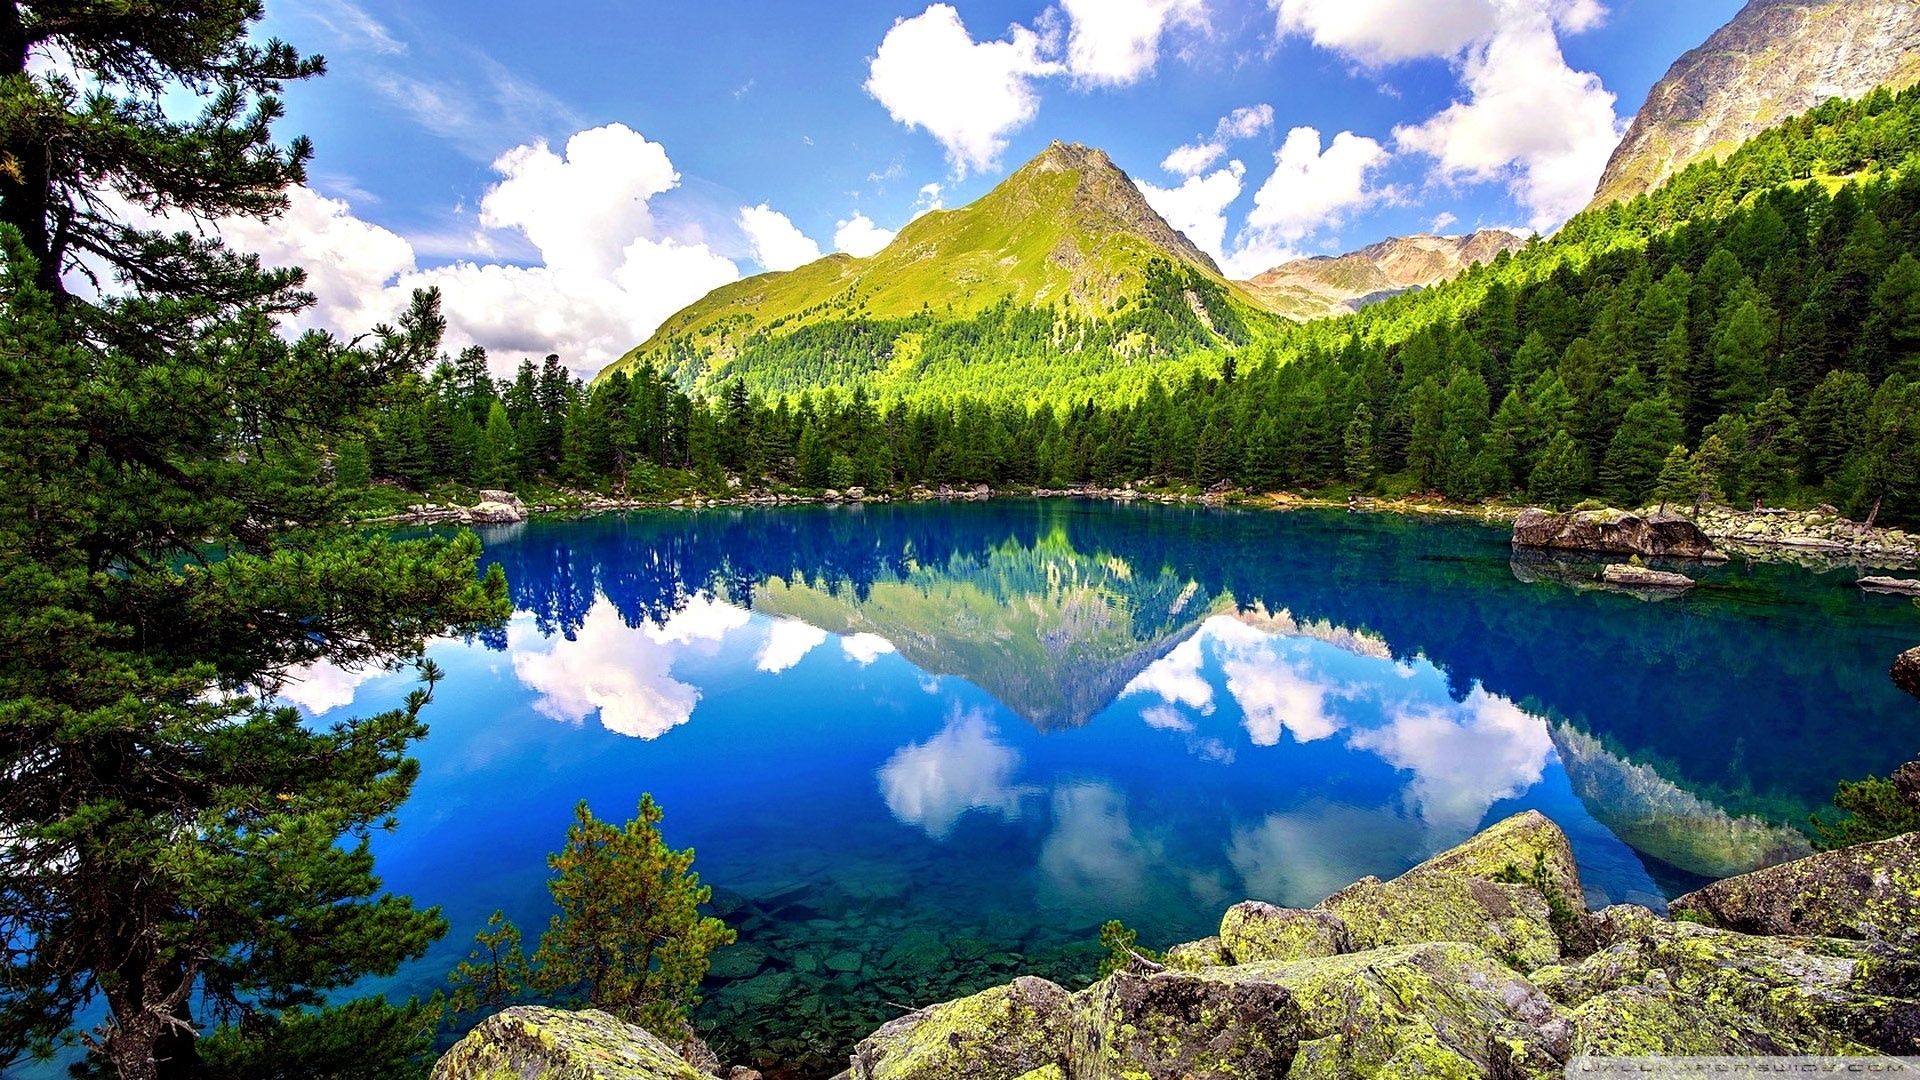 45 Springtime in the Mountains Wallpapers   Download at WallpaperBro